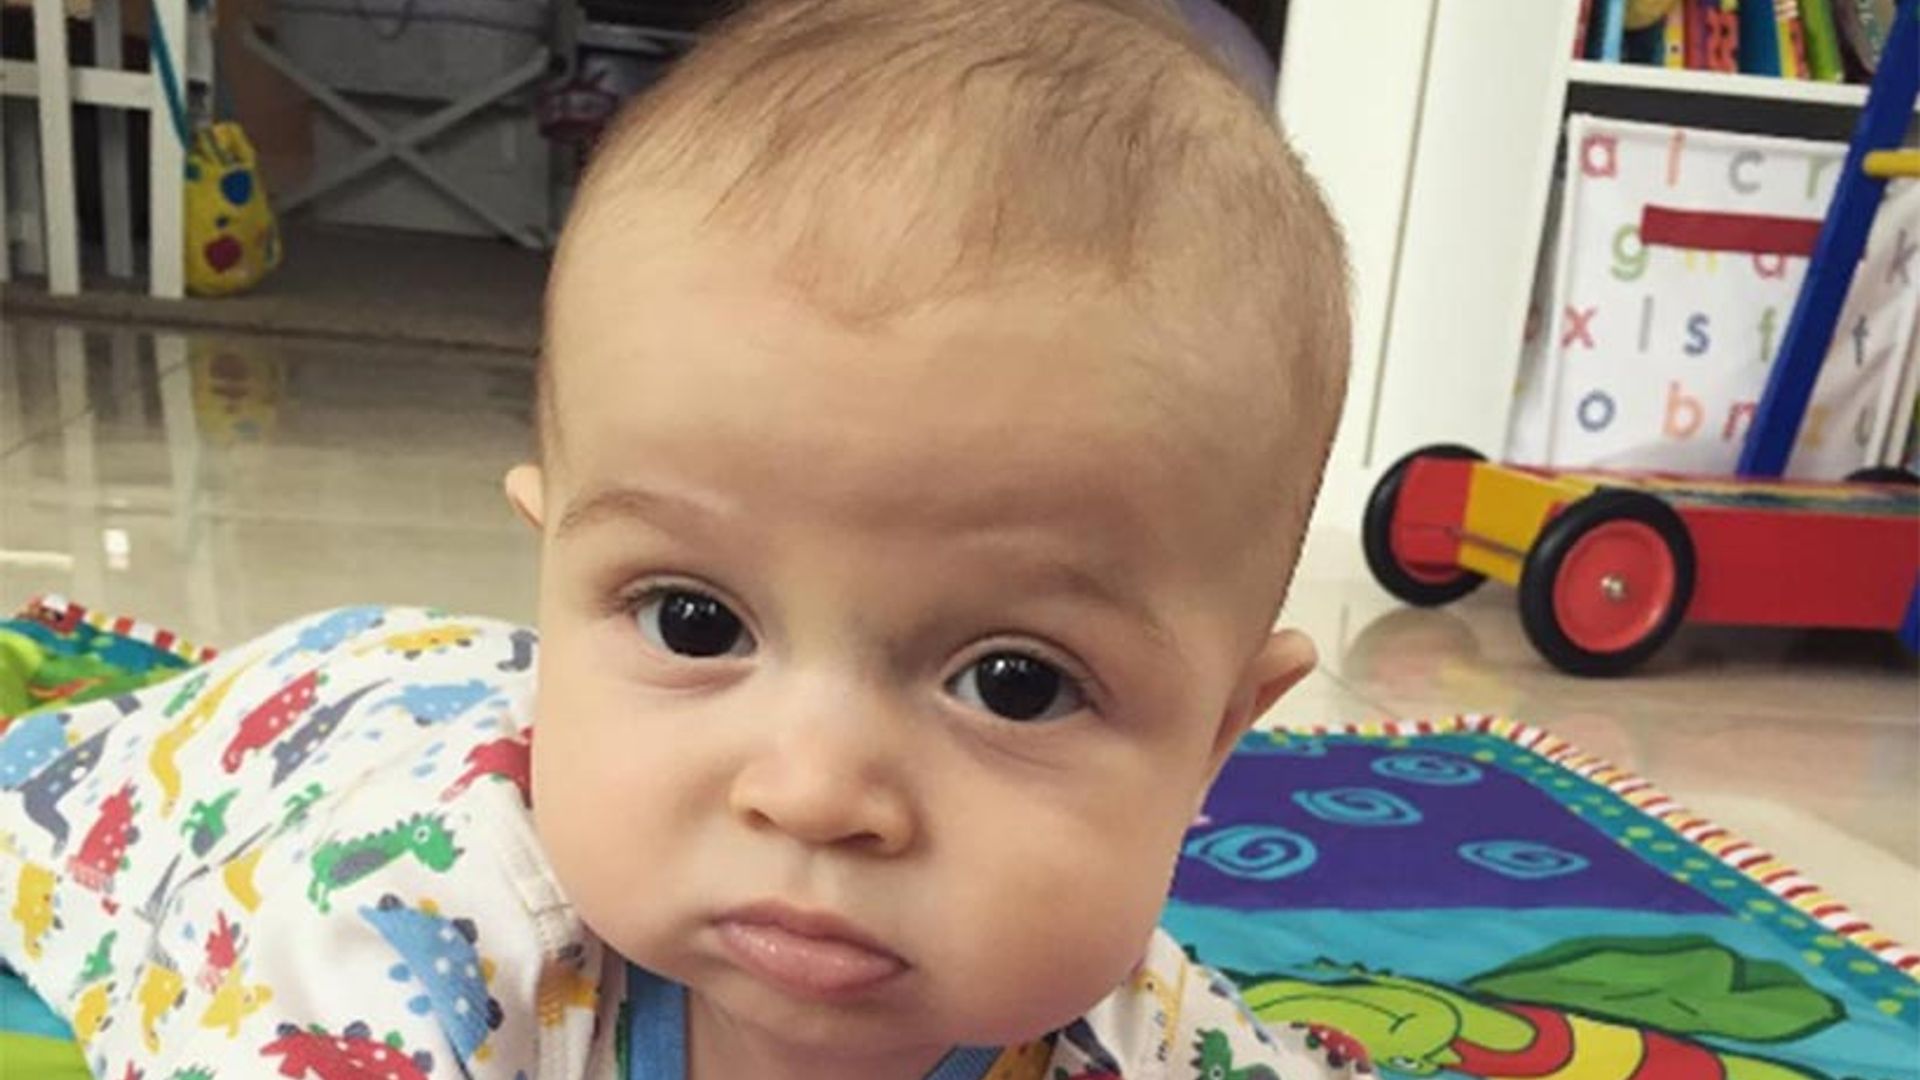 Giovanna Fletcher shares adorable new snap of baby son – and he looks just like her!